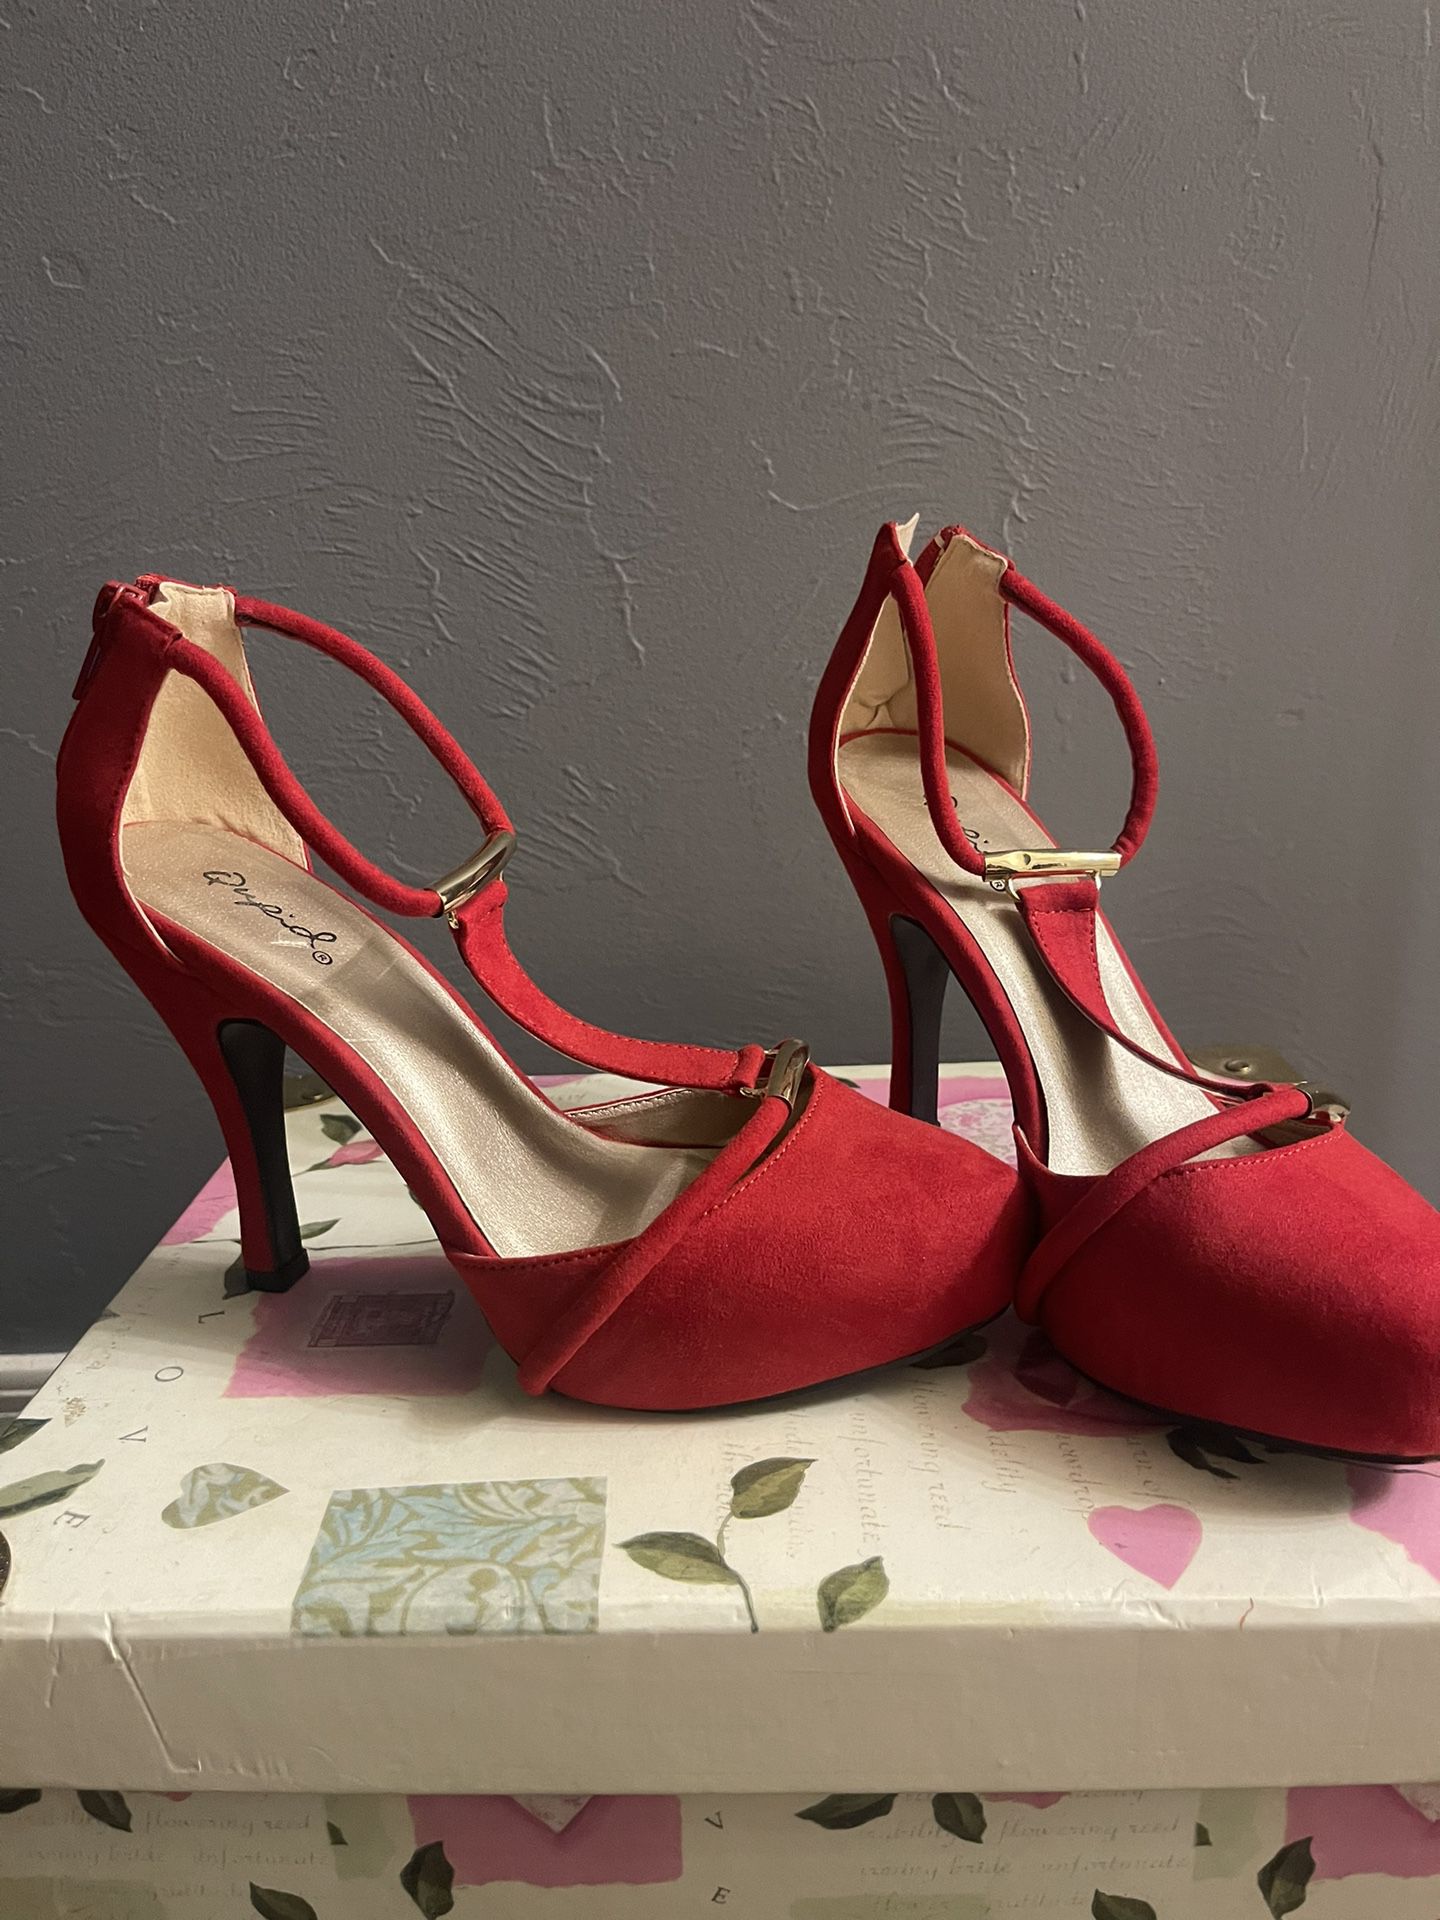 Red Heels Size 6 